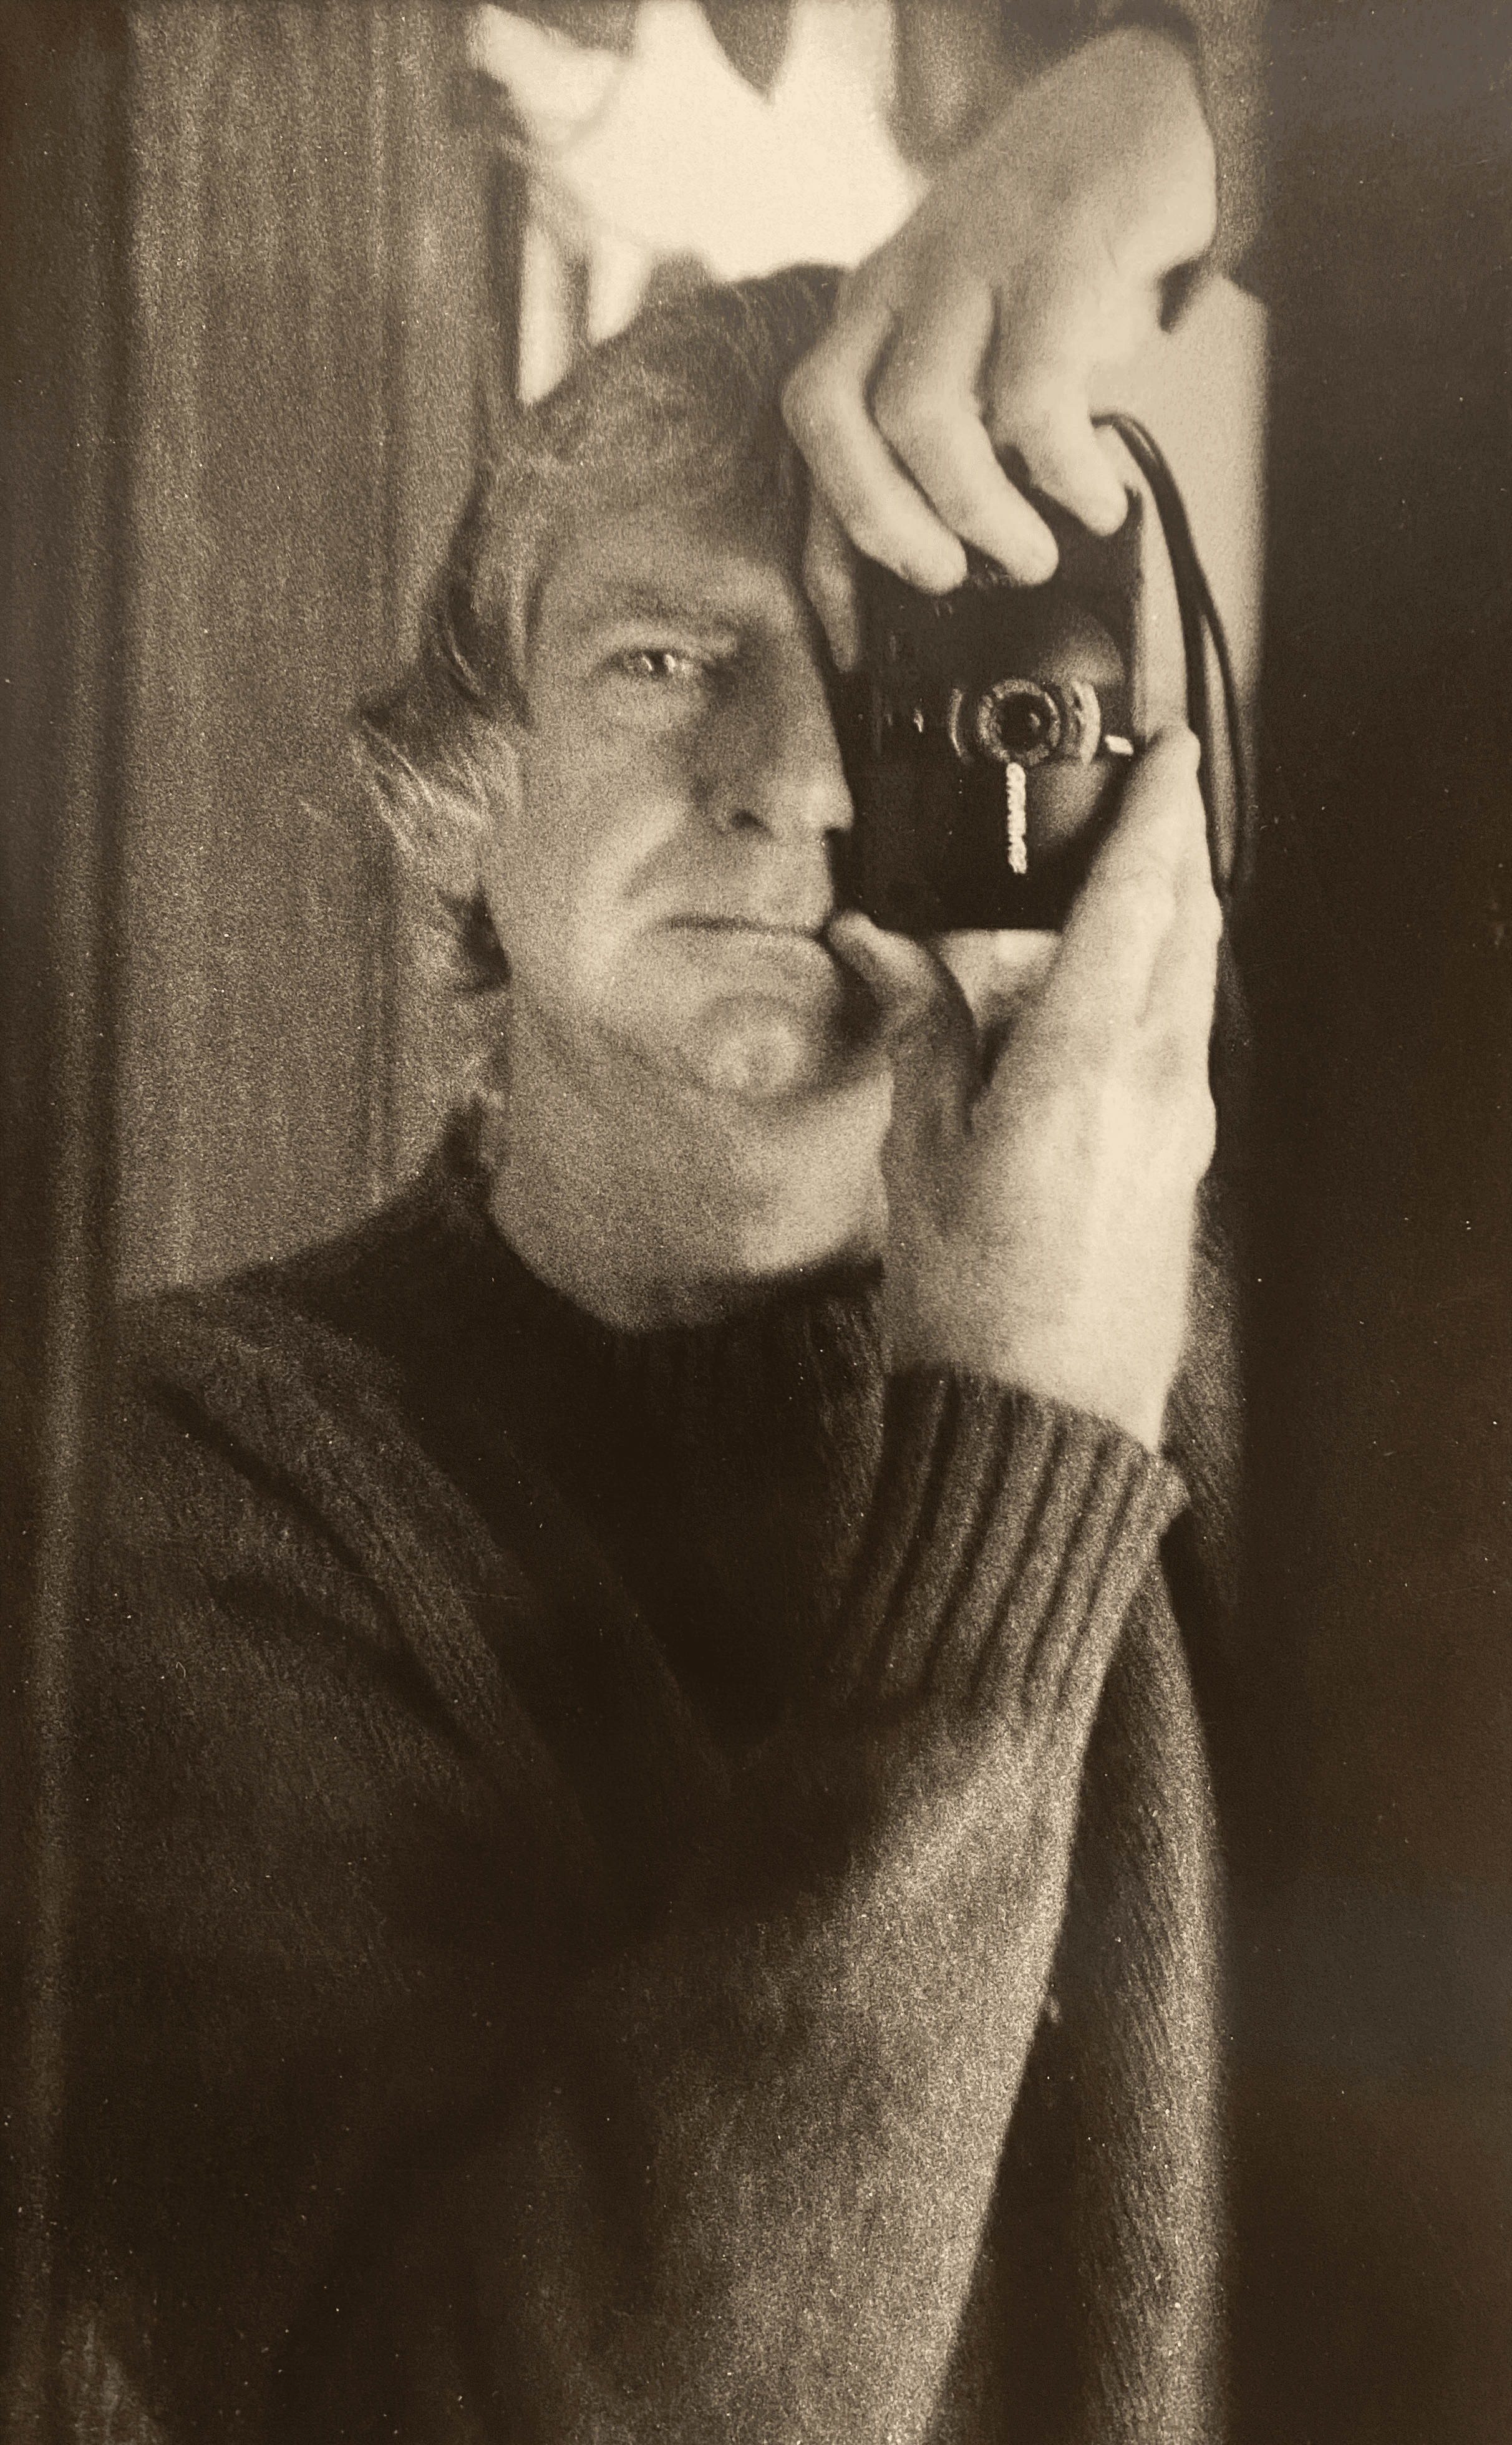 Black and white image of a man taking a photo of himself using a mirror